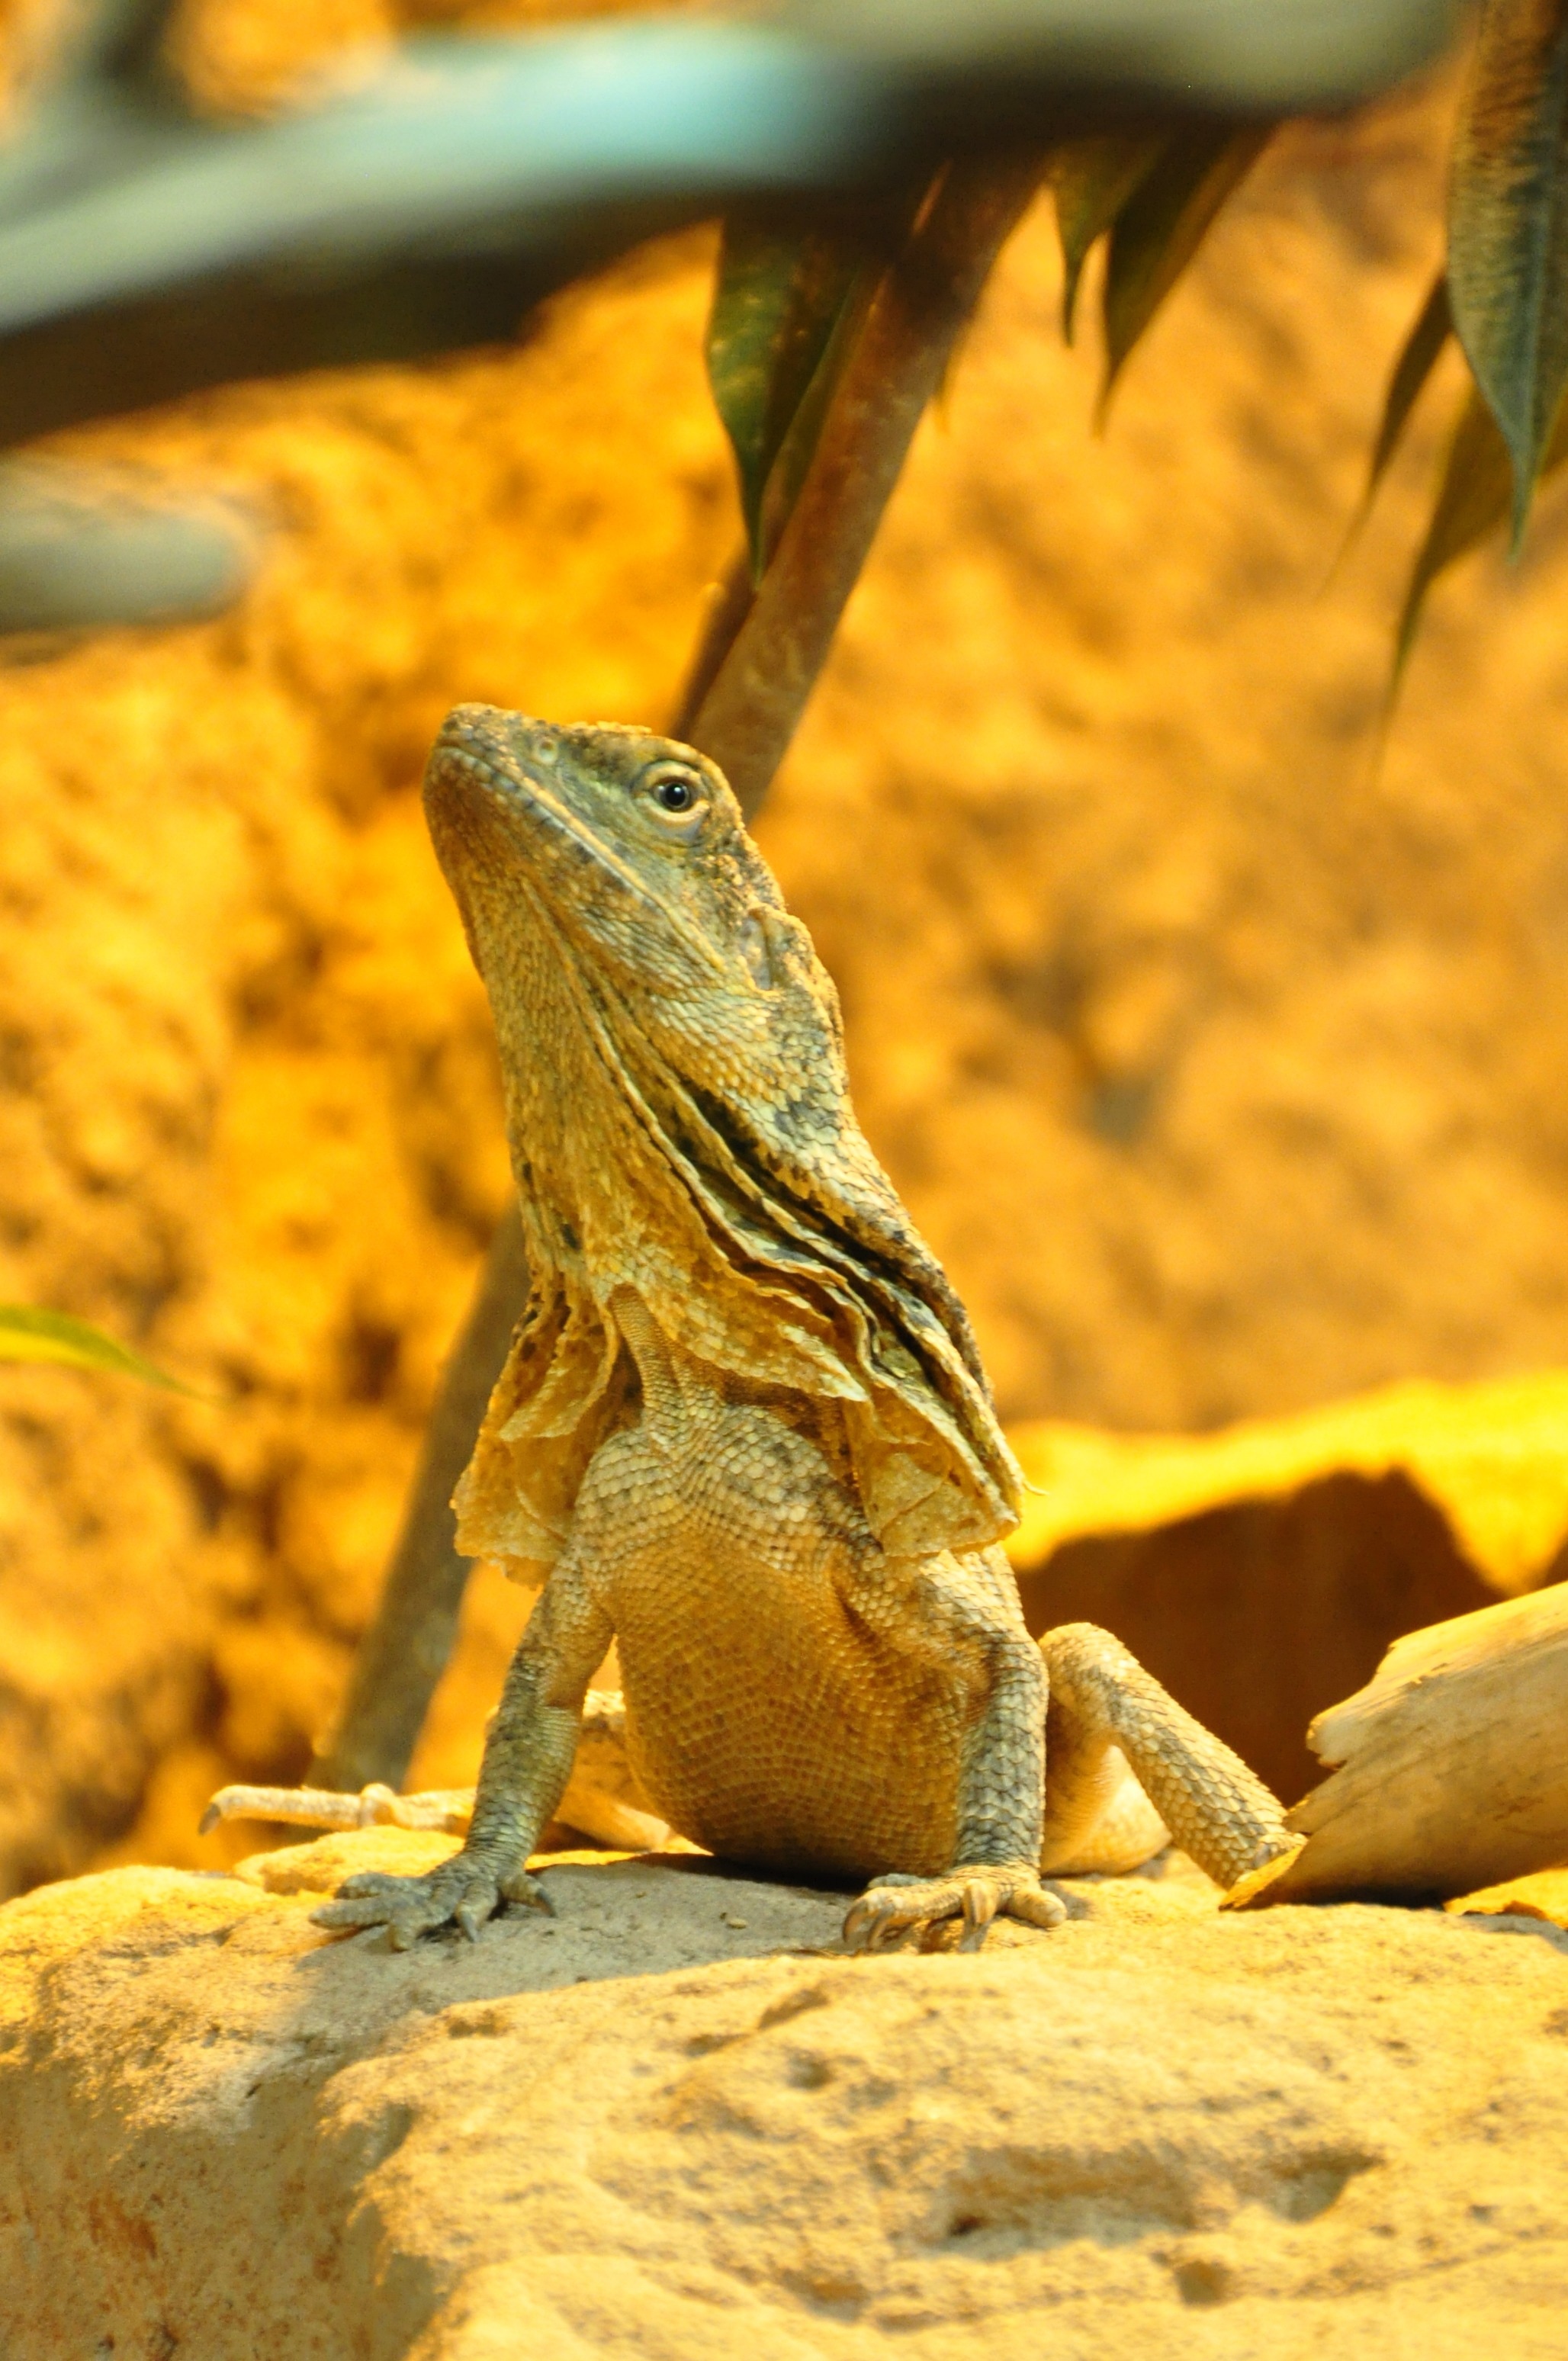 brown and gray lizard